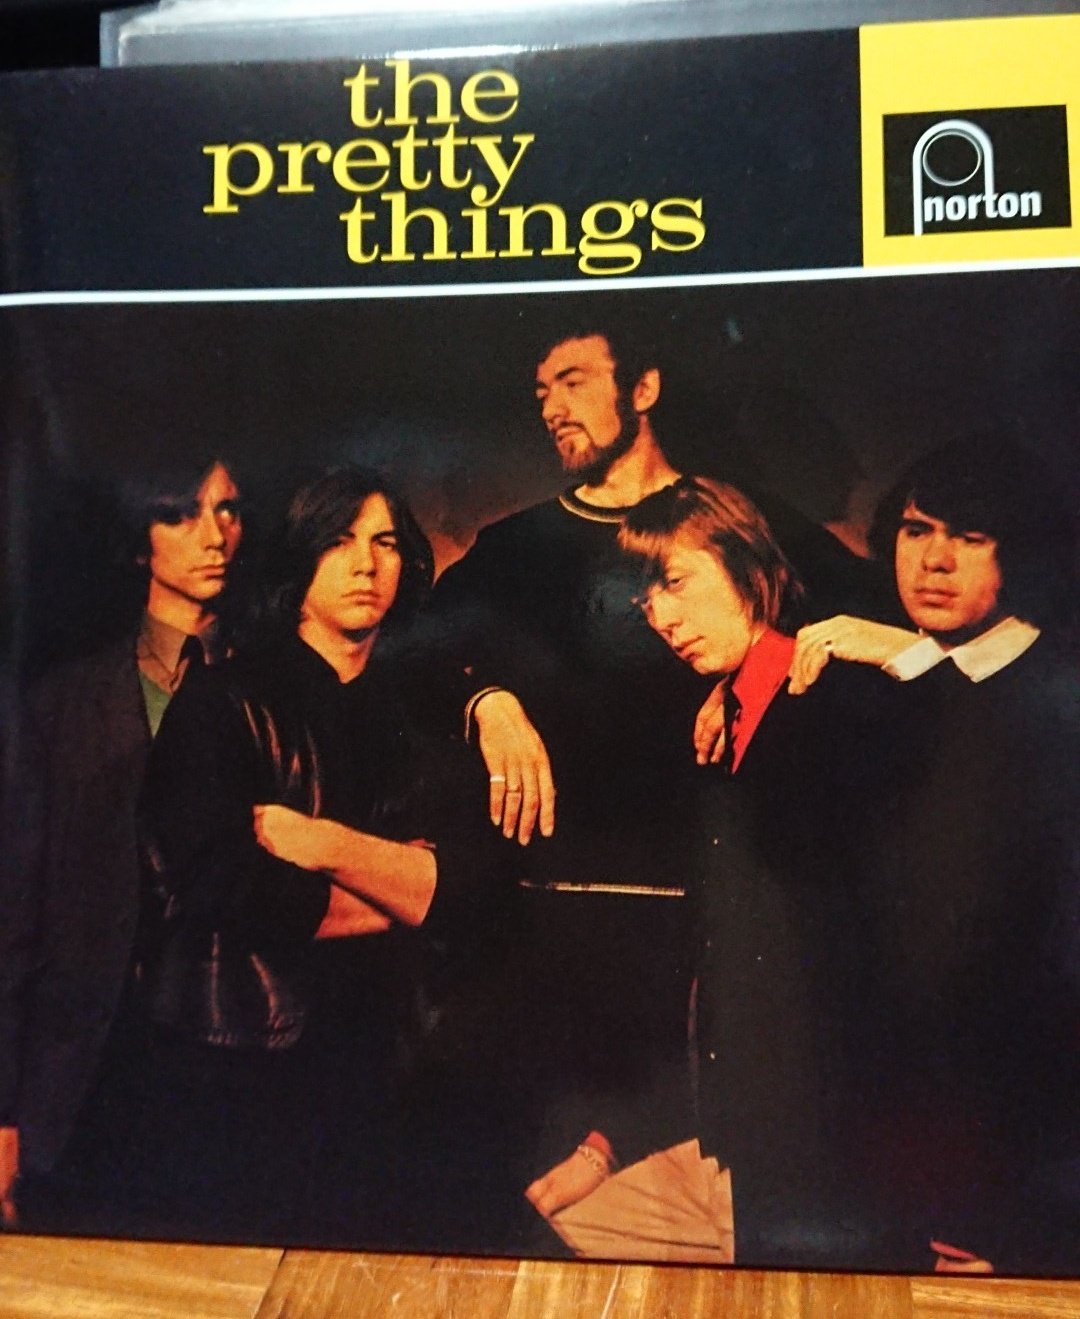  the pretty things 
Happy birthday Dick Taylor 